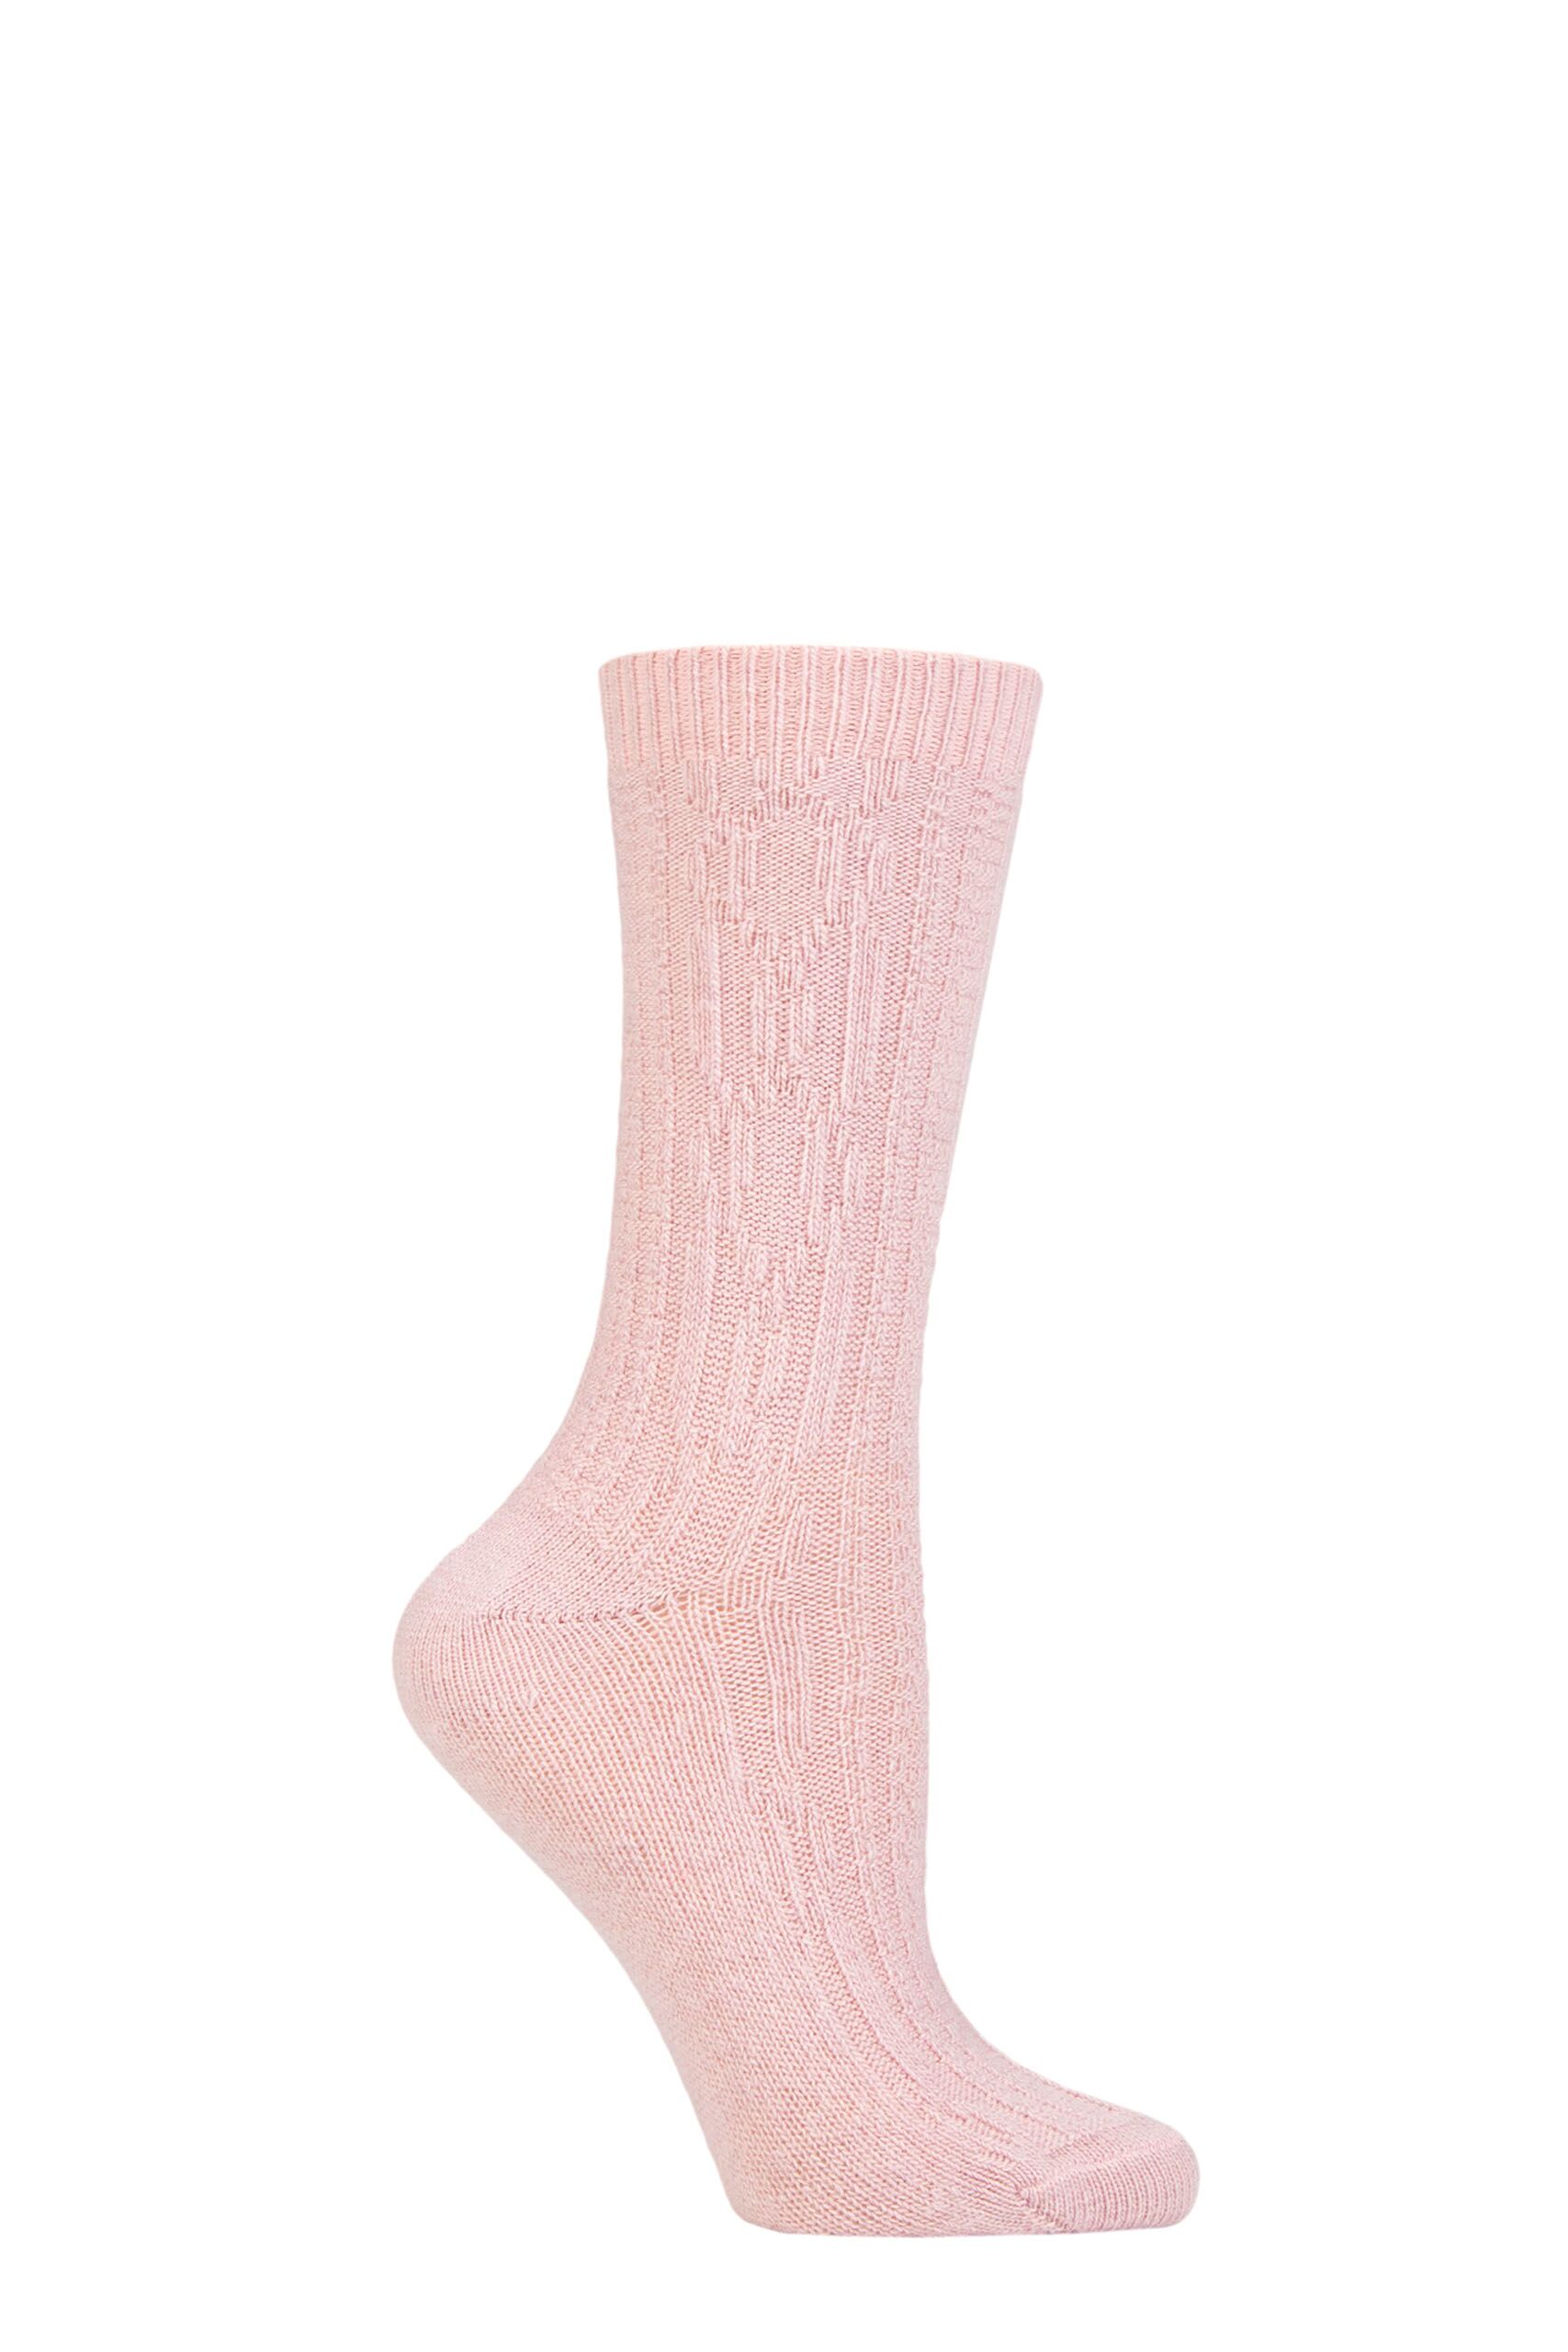 Ladies 1 Pair Charnos Cashmere Cable Socks Pink One Size